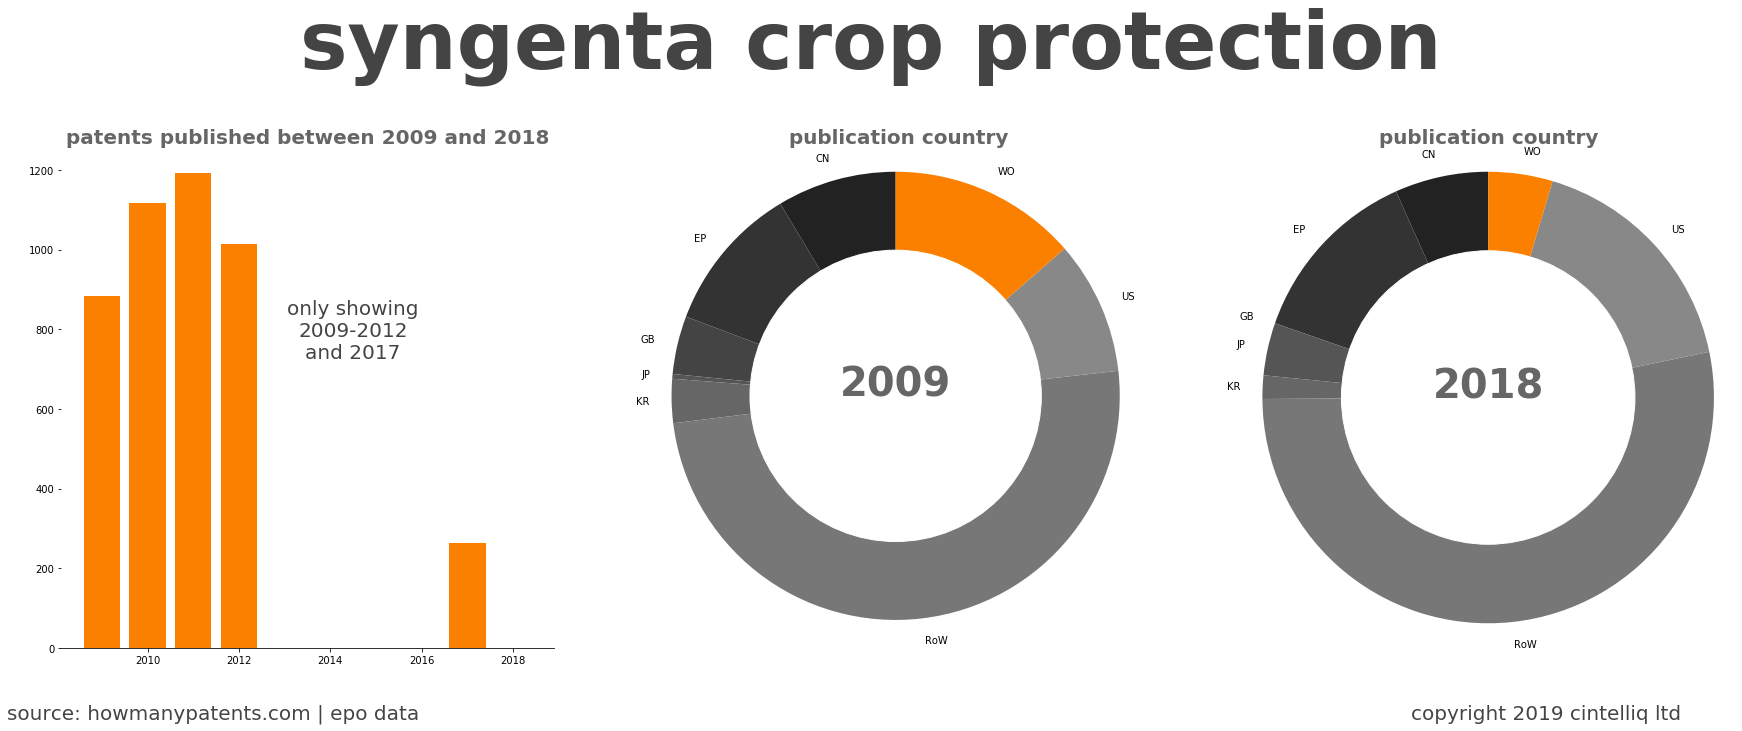 summary of patents for Syngenta Crop Protection